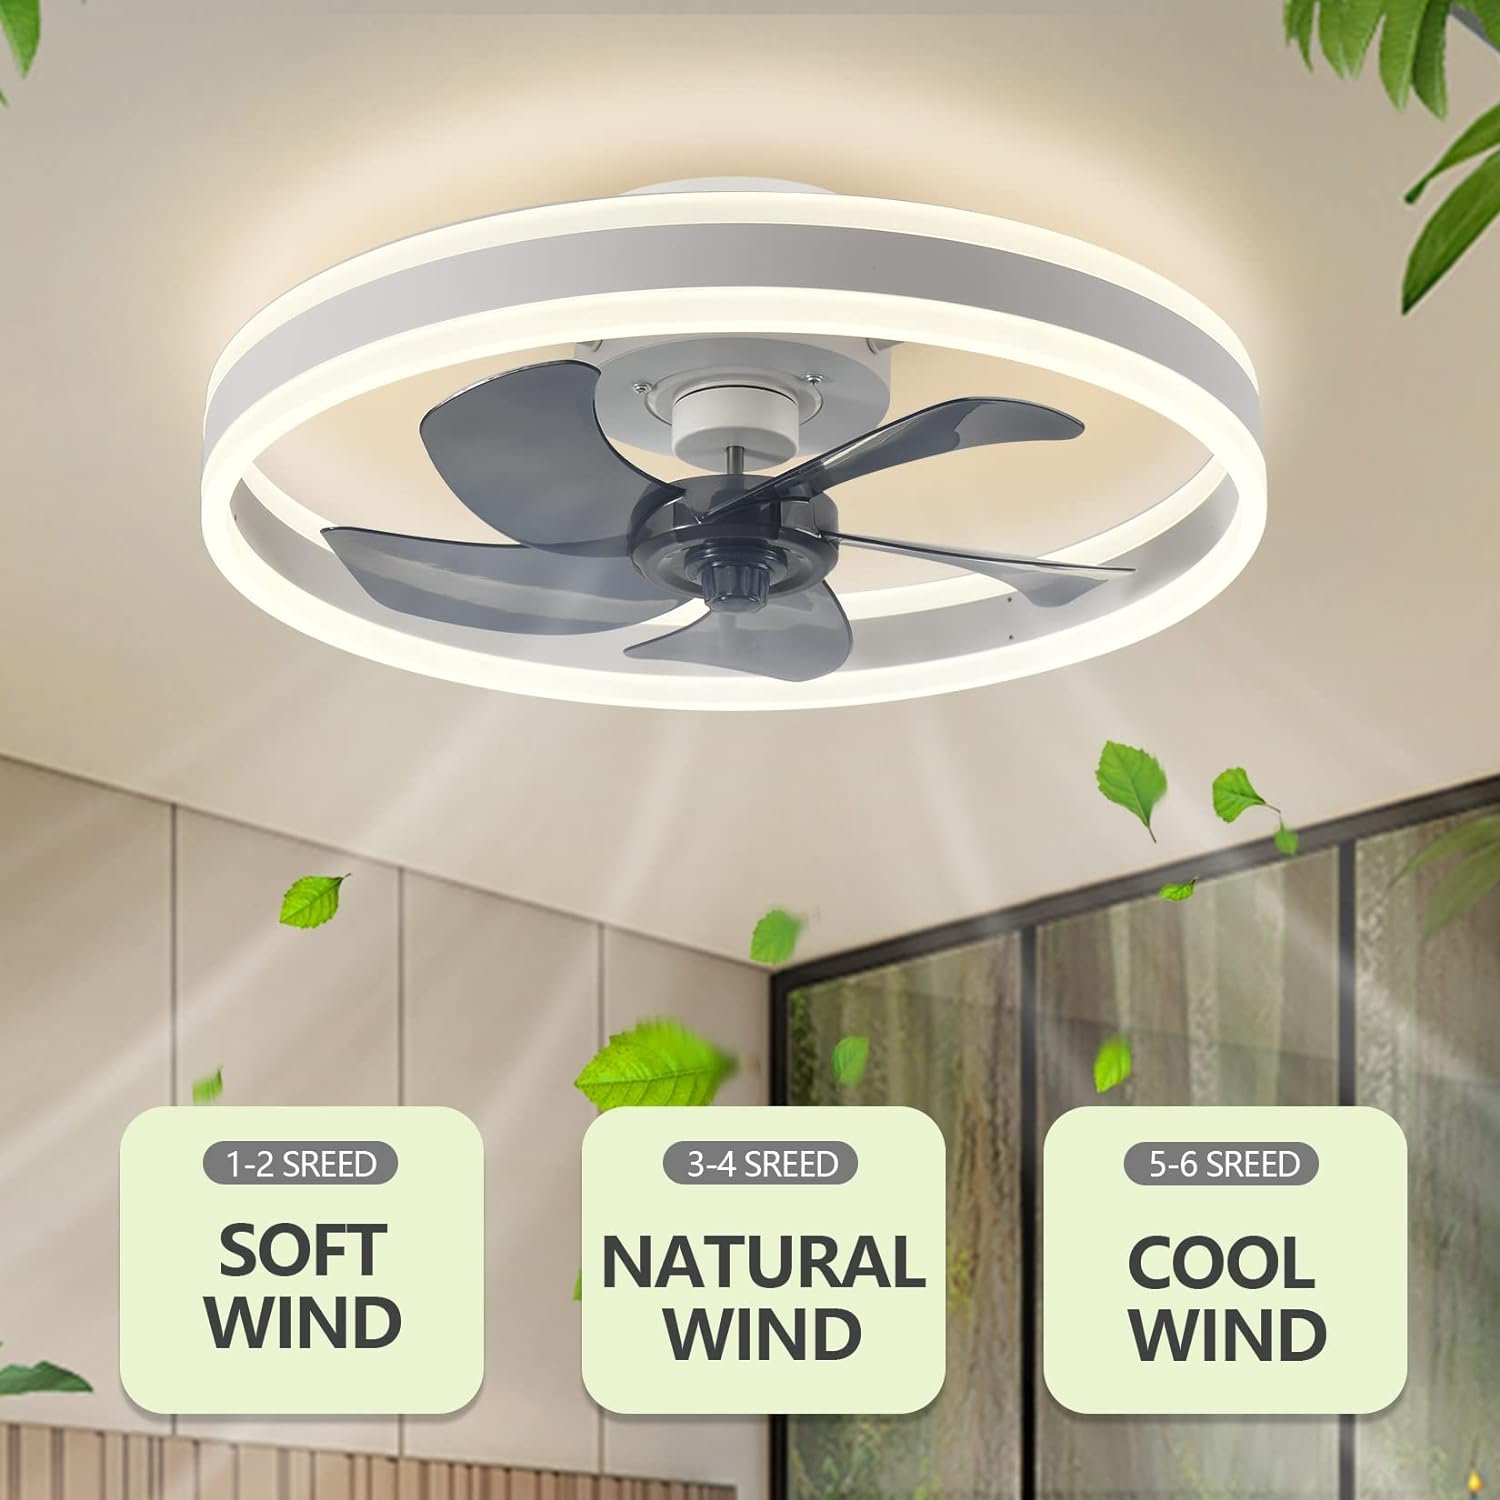 AHAWILL Fandelier Ceiling Fans with Lights and Remote,Modern Flush Mount Ceiling Fan with Light 6 Speeds Timing,Low Profile Ceiling Fans for Bedroom,Study,Dining Room,etc.(19.7 White)